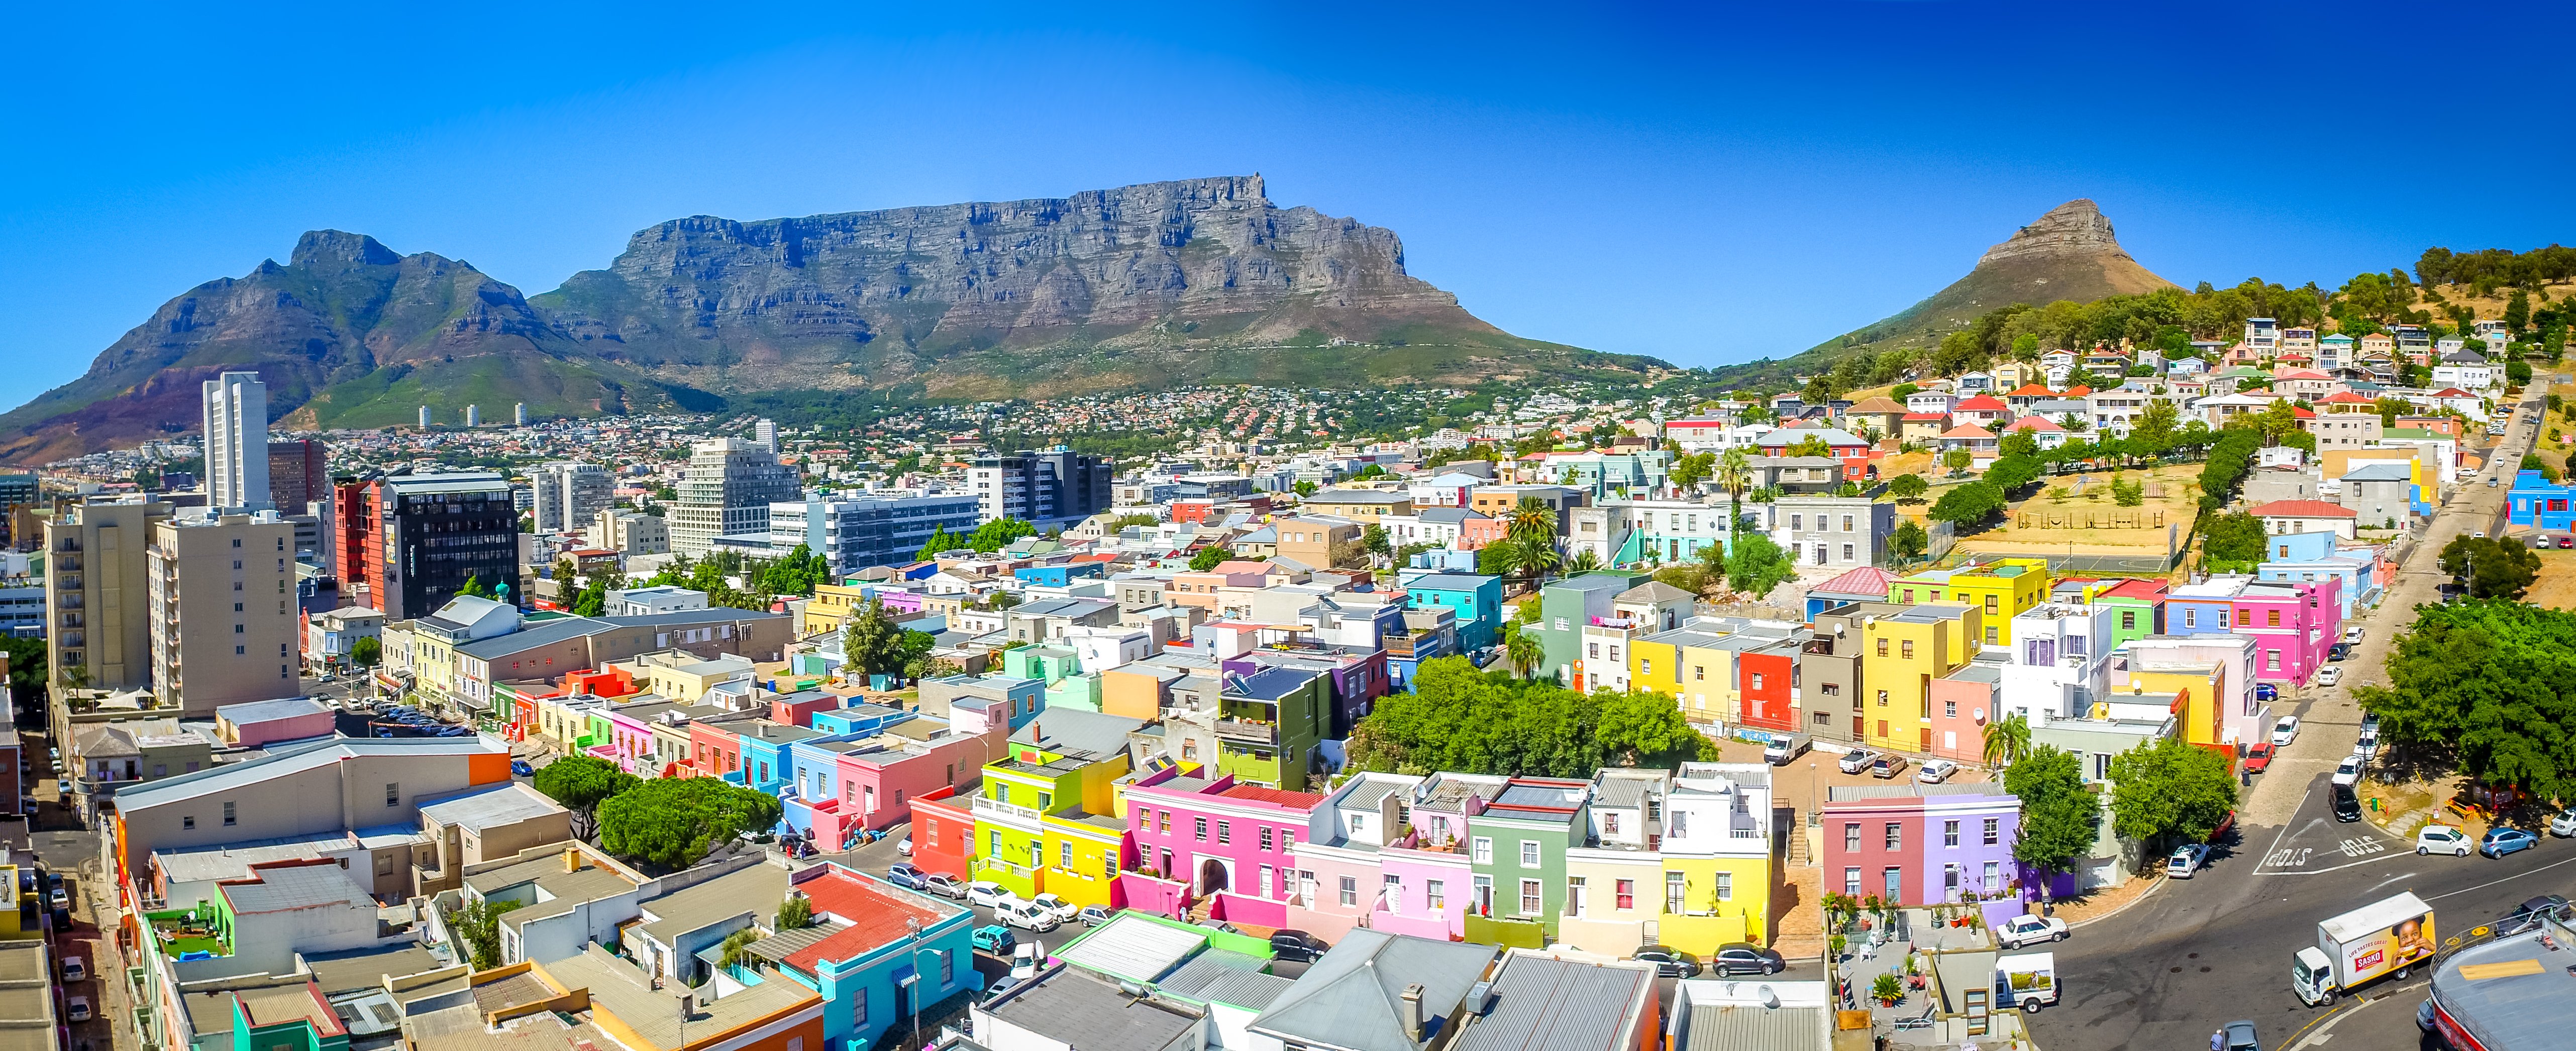 Cape Town, Mountains, South Africa, Table Mountain, Bo Kaap, City, Building Wallpaper